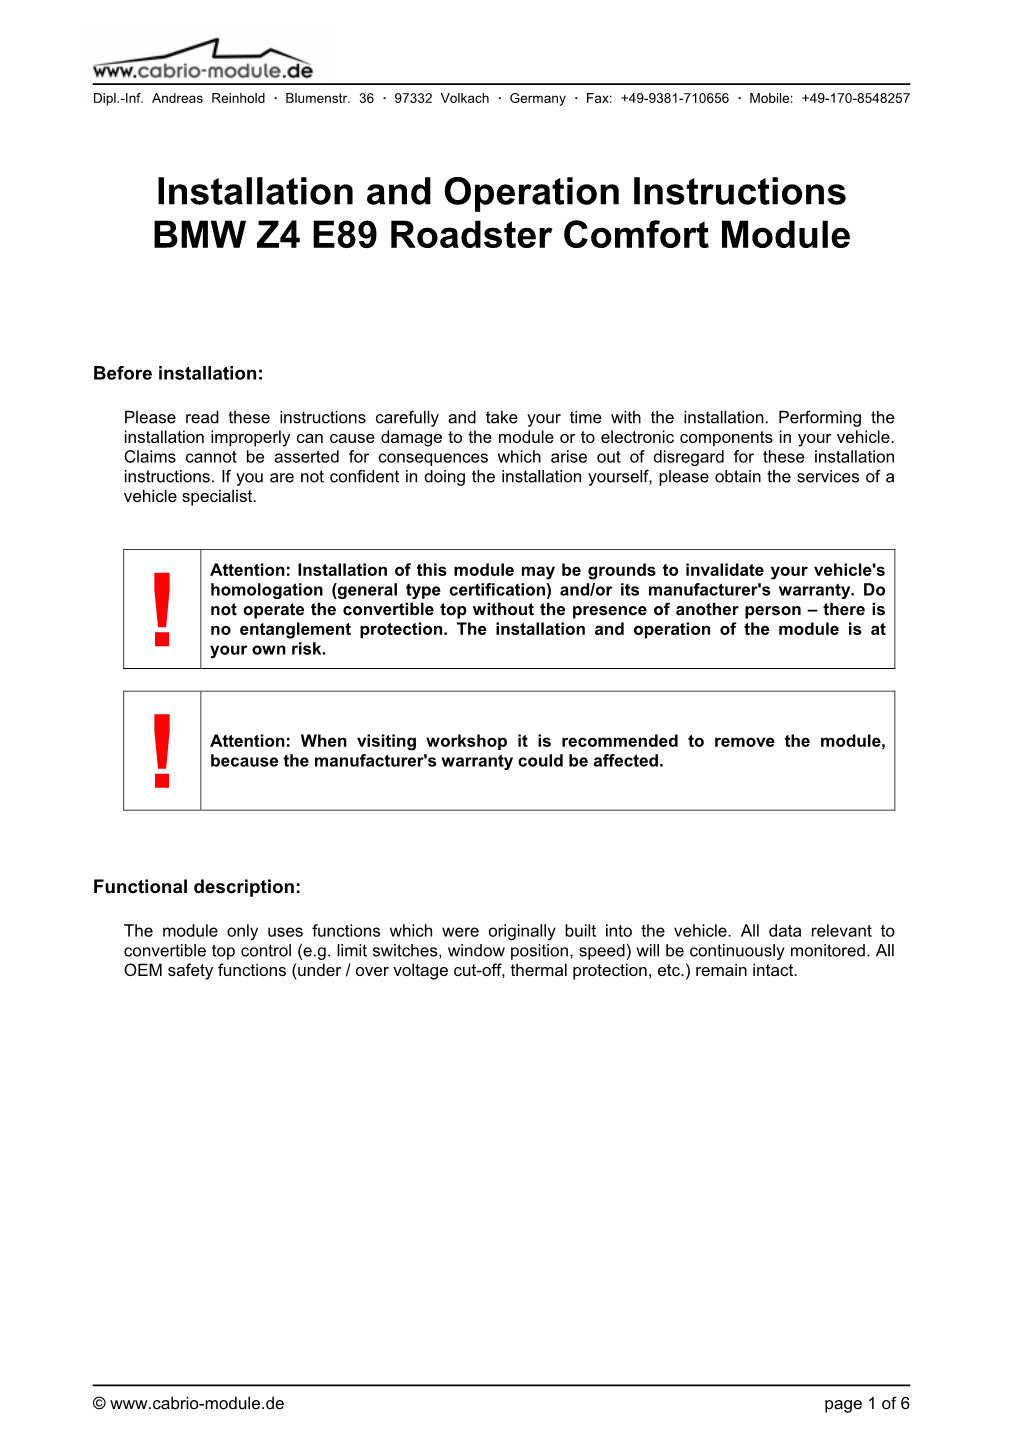 Installation and Operation Instructions BMW Z4 E89 Roadster Comfort Module